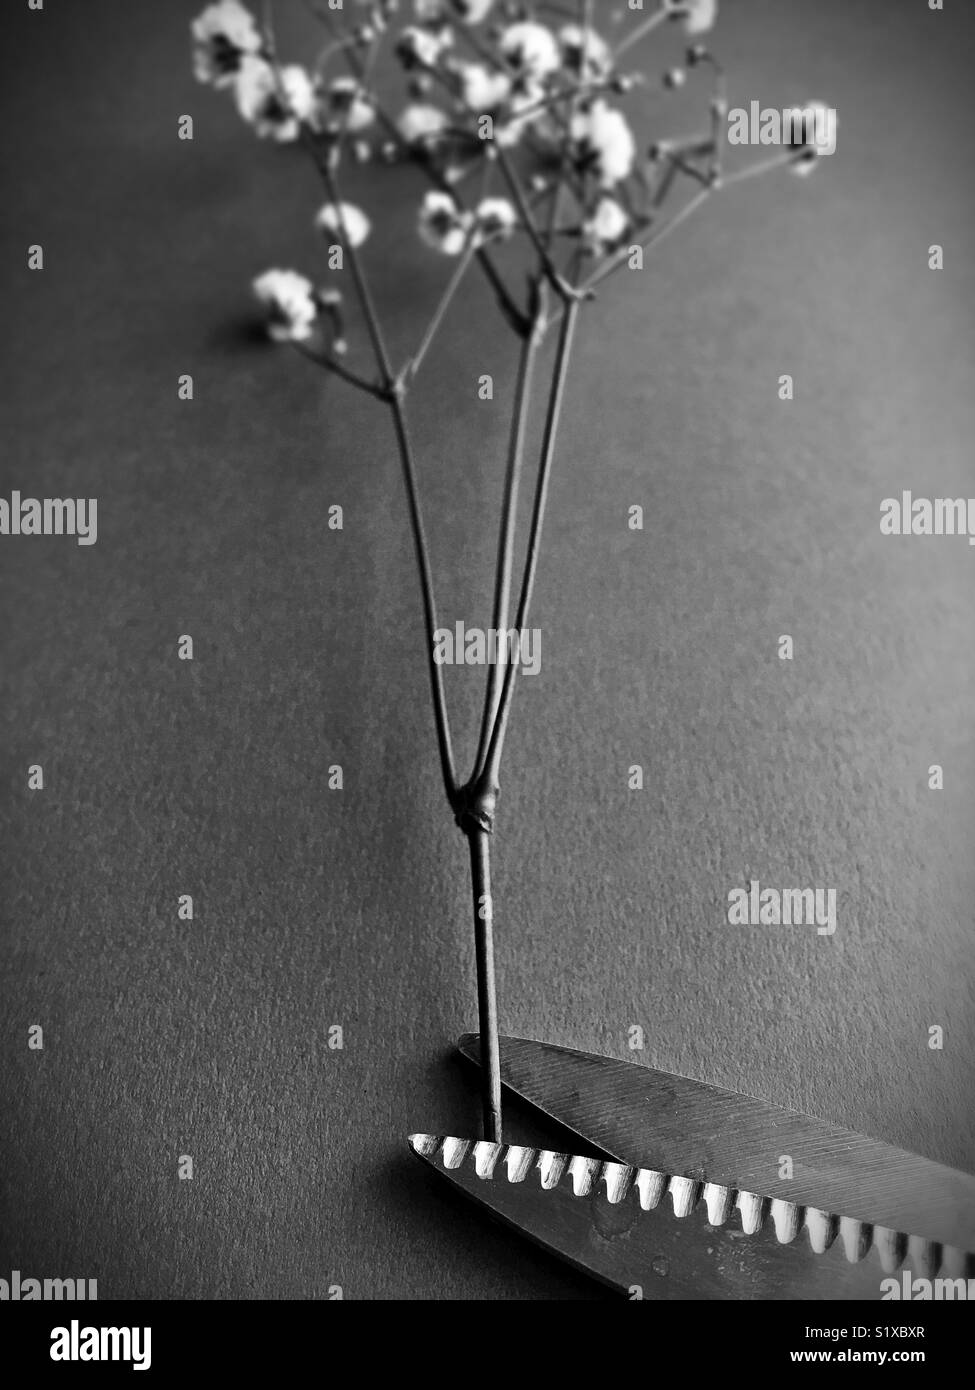 A sprig of baby’s breath flowers and the tip of gardening shears. Stock Photo